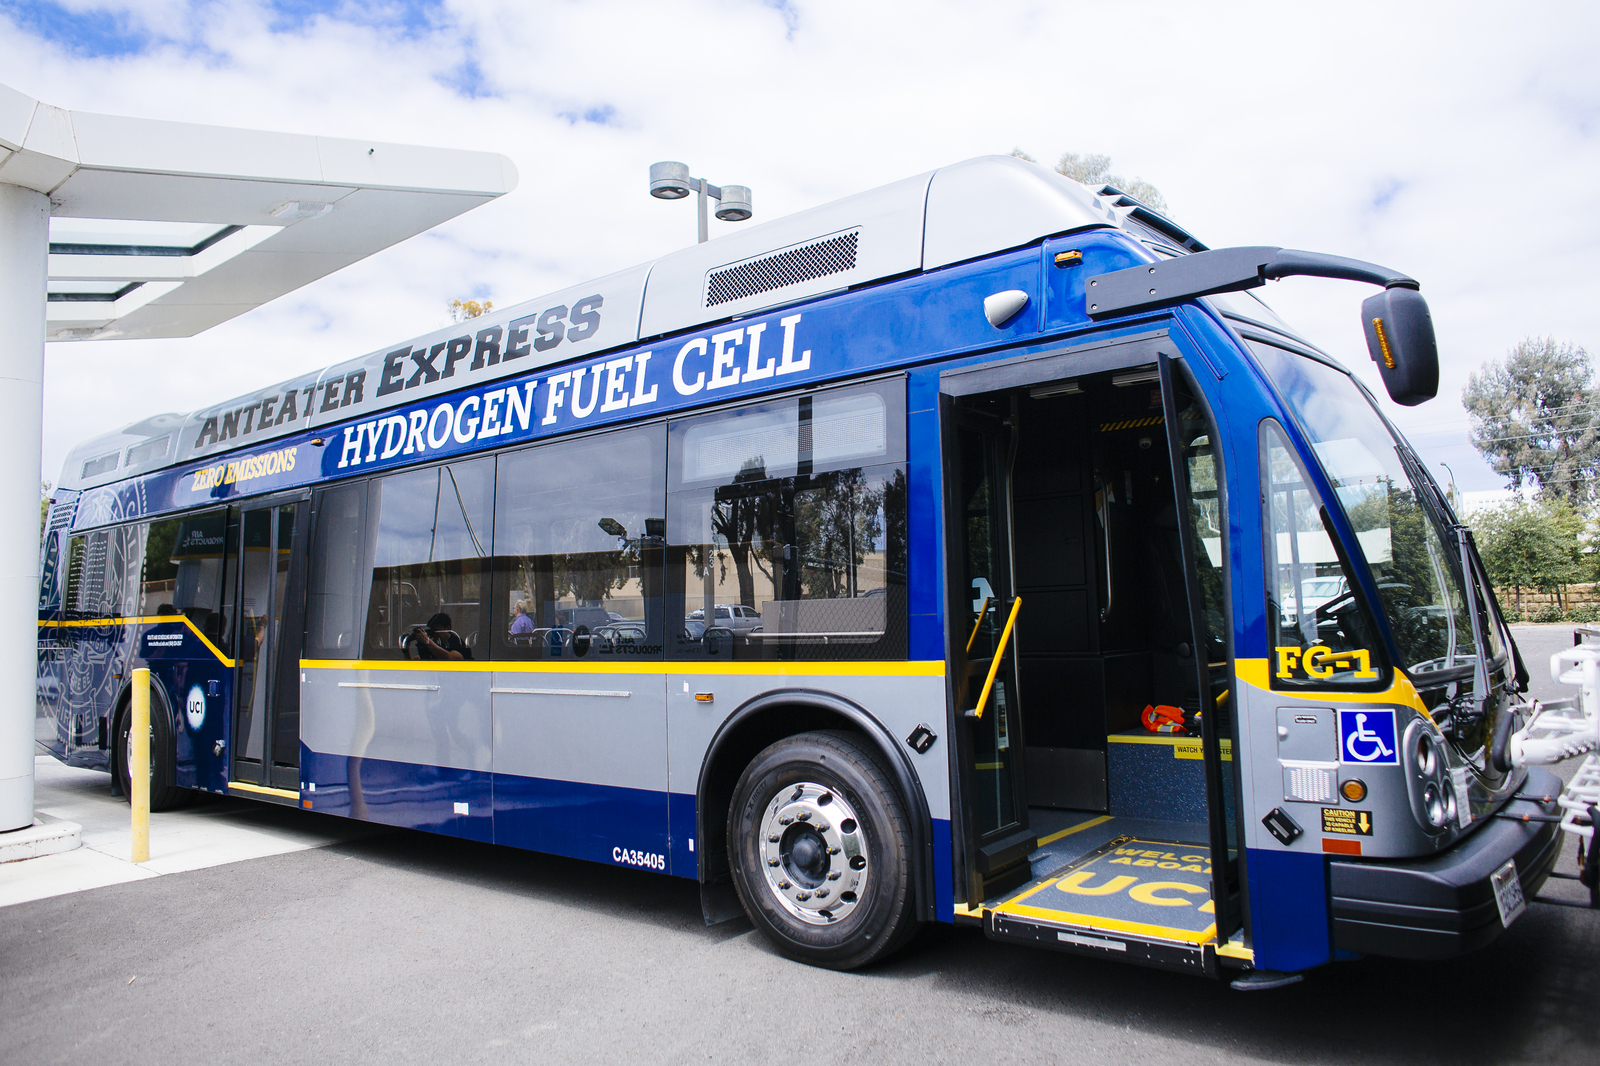 A fuel cell bus, painted blue, silver and yellow, with "ANTEATER EXPRESS" written on the roof